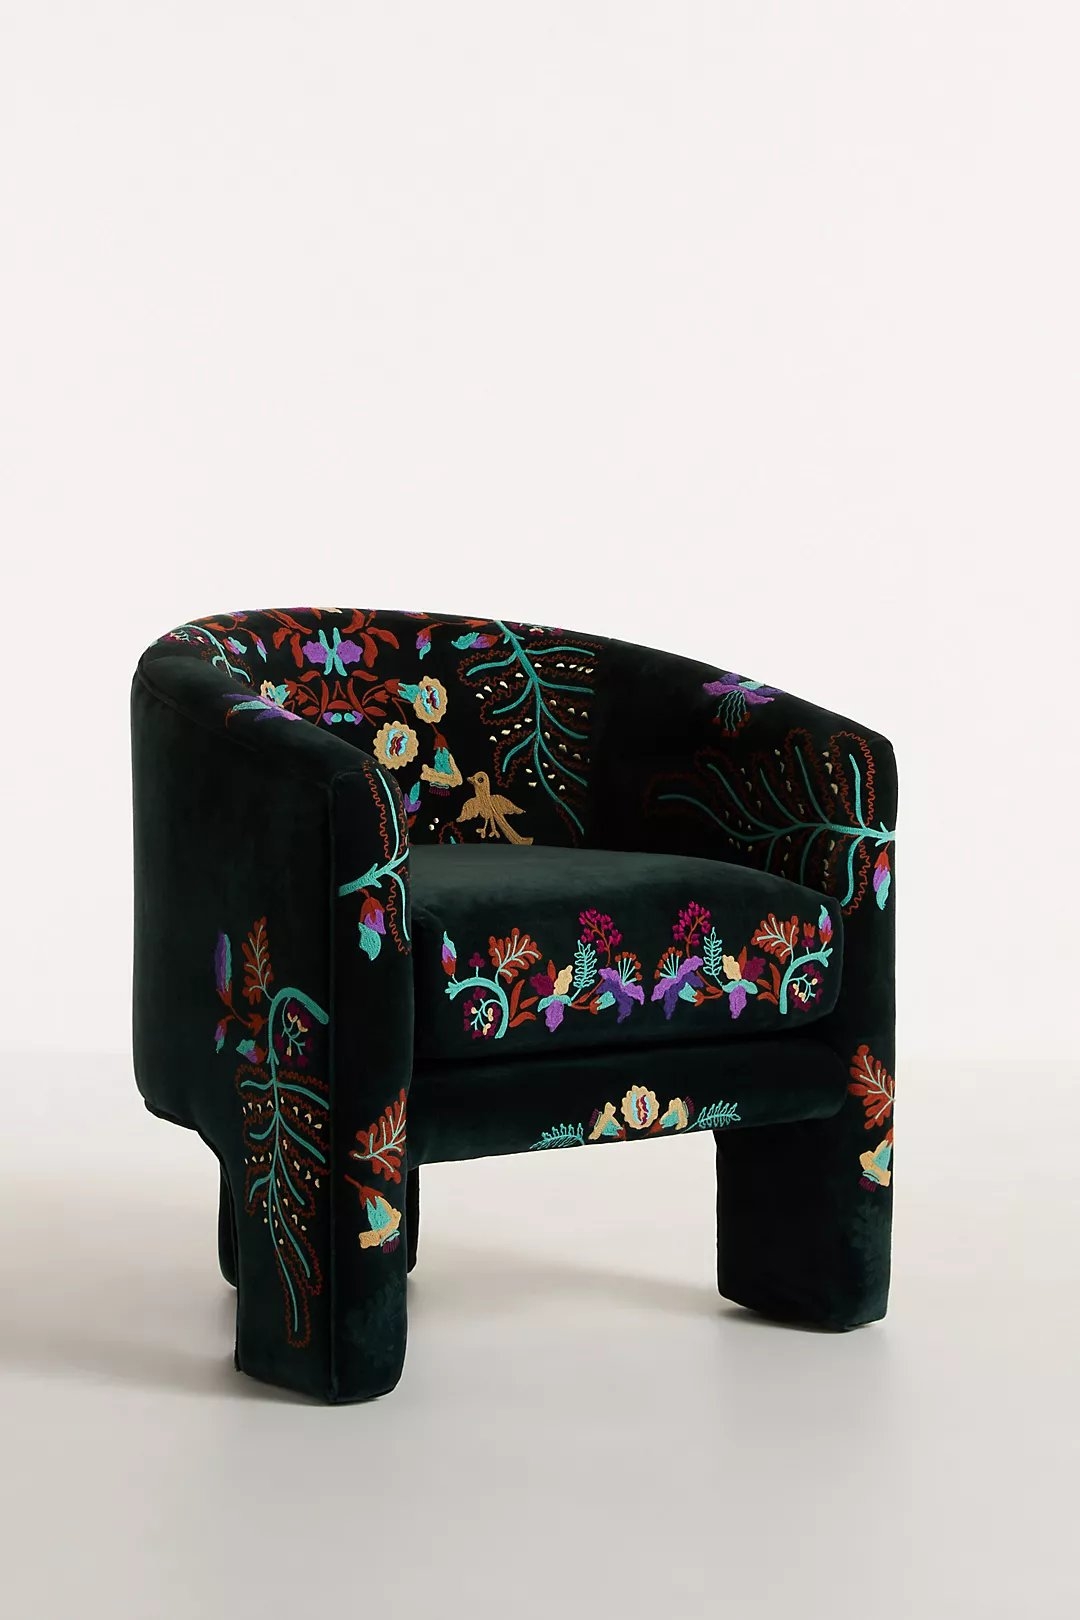 Floral Effie Accent Chair By Anthropologie in Blue - Image 2